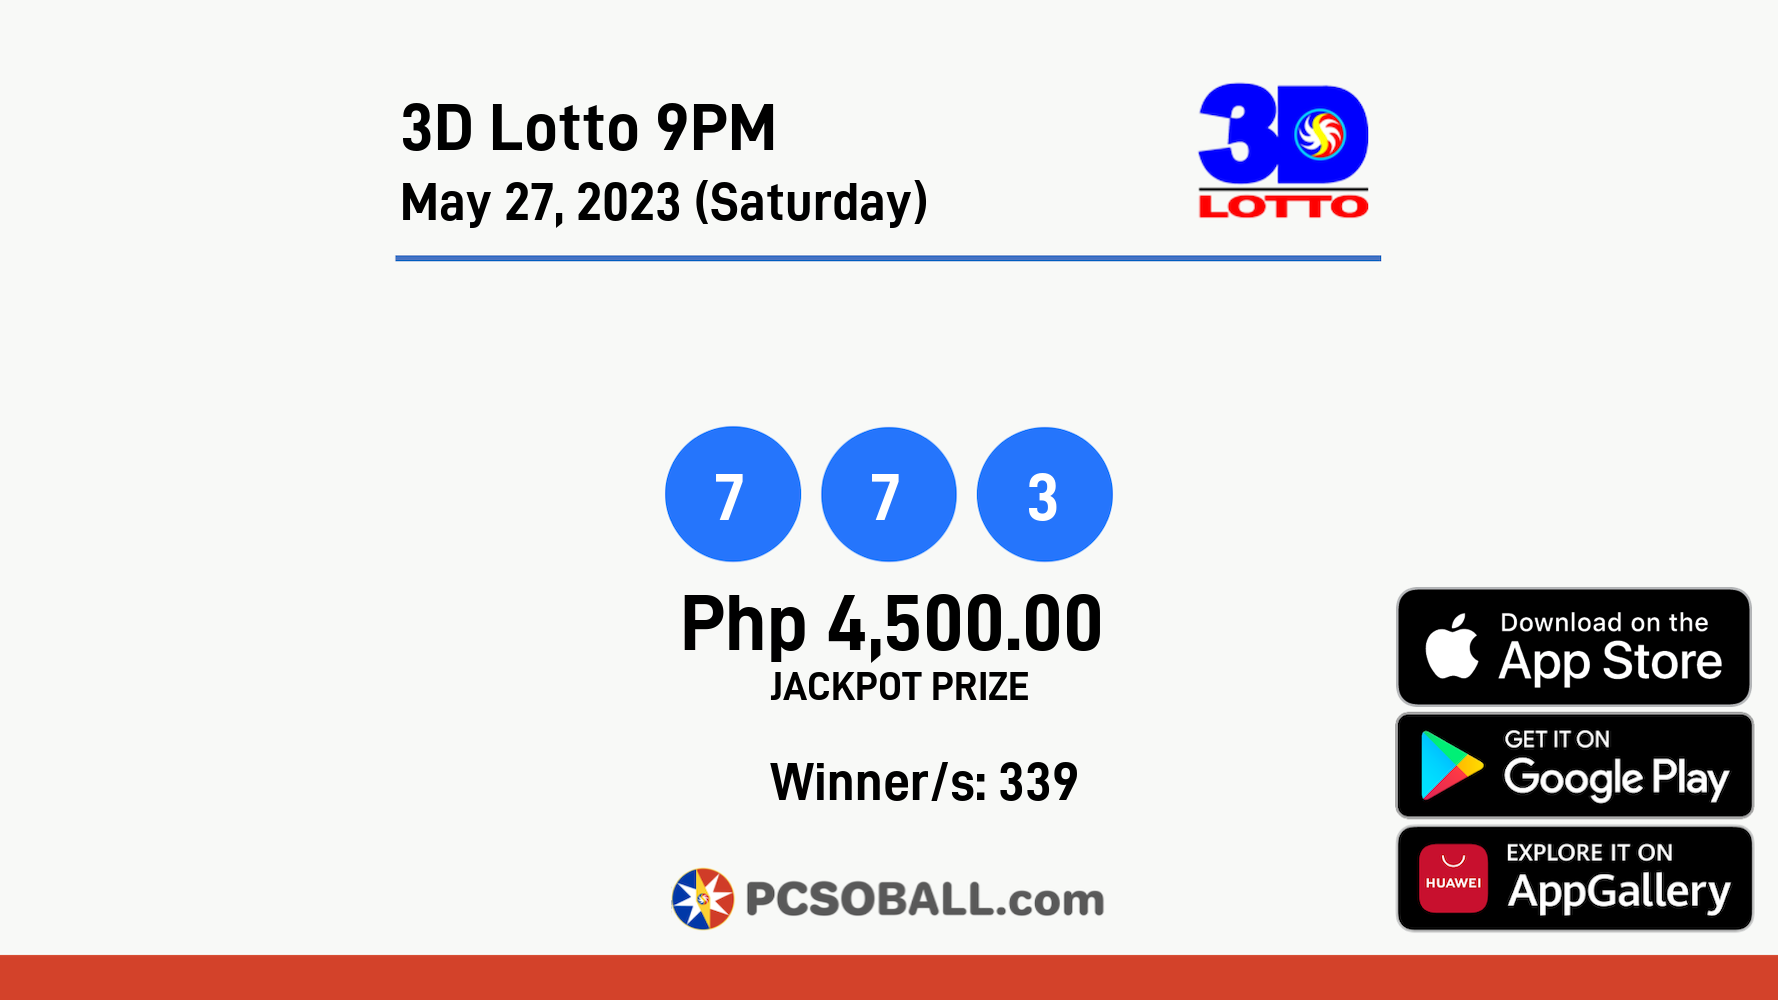 3D Lotto 9PM May 27, 2023 (Saturday) Result